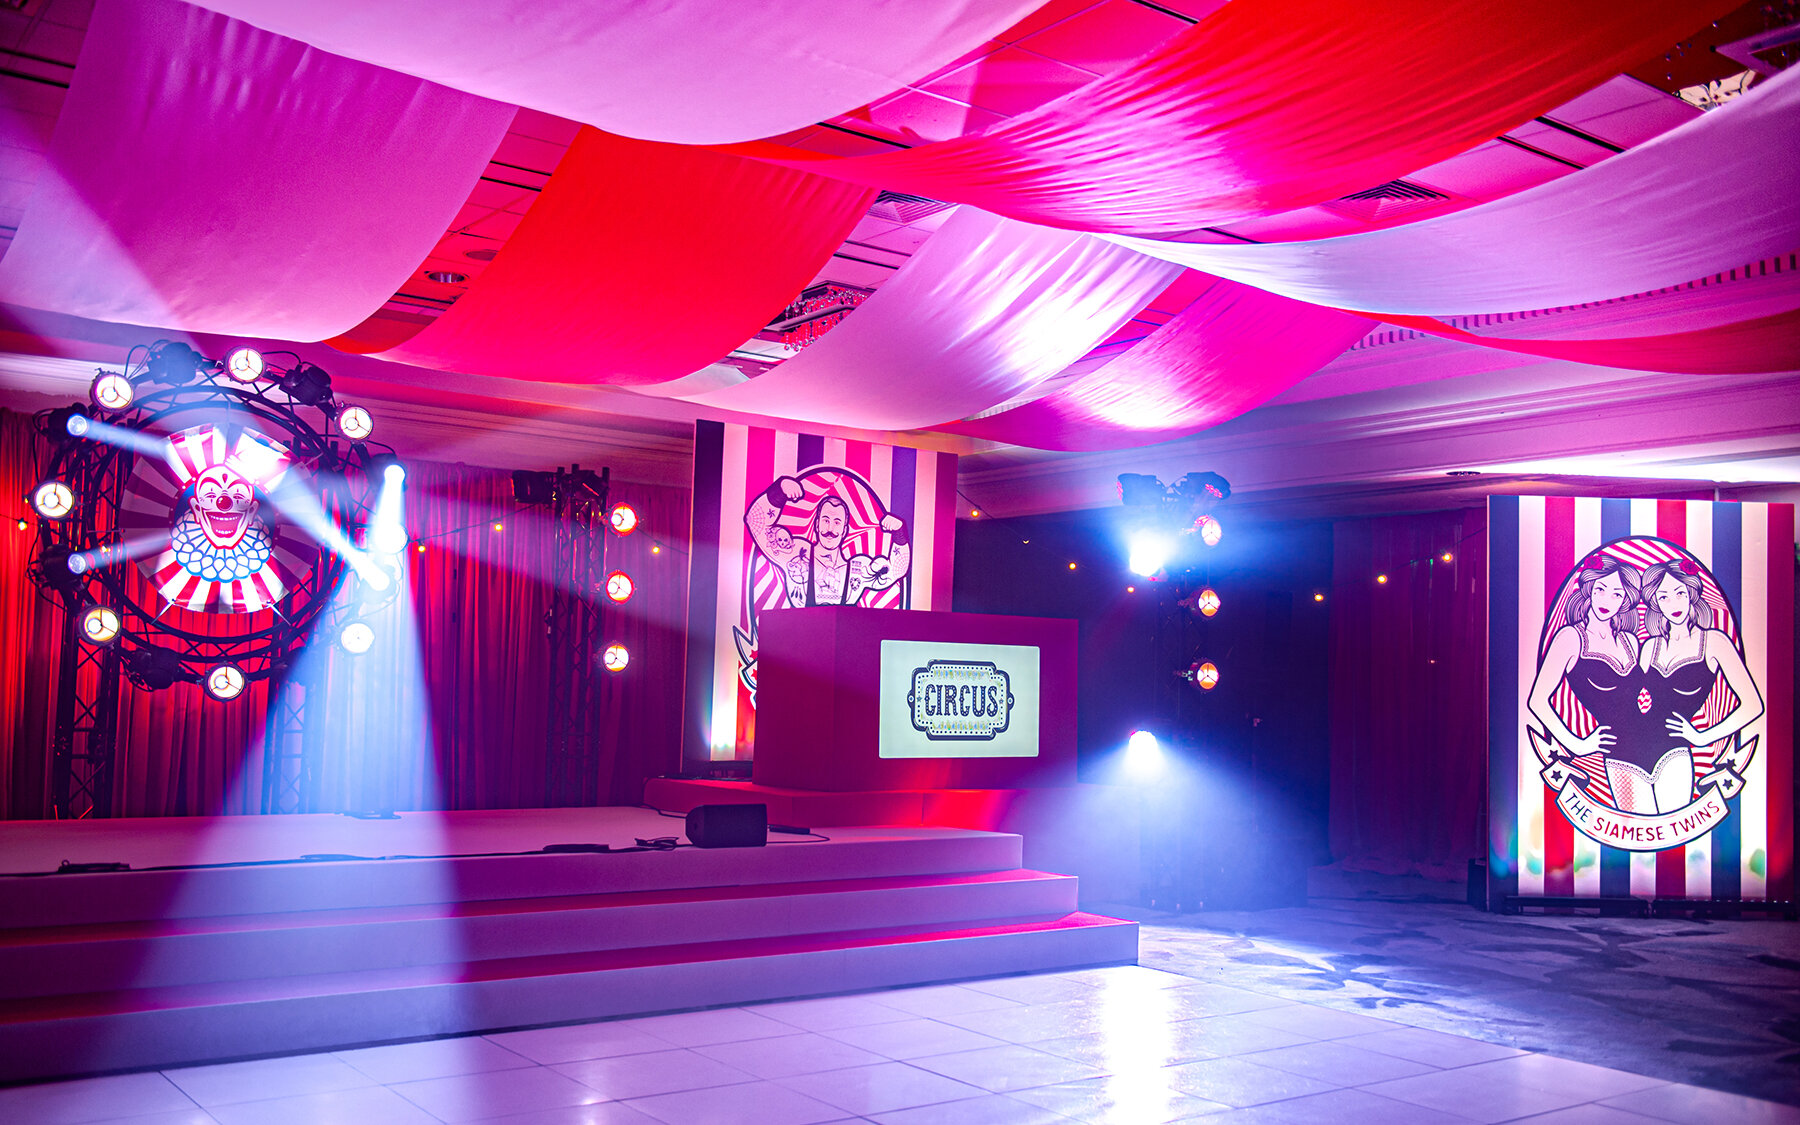 reveries-events-brighton-circus-themed-party-hilton-metropole-event-design-staging-lighting-drapes-dancefloor-audio-technical-management-o.jpg